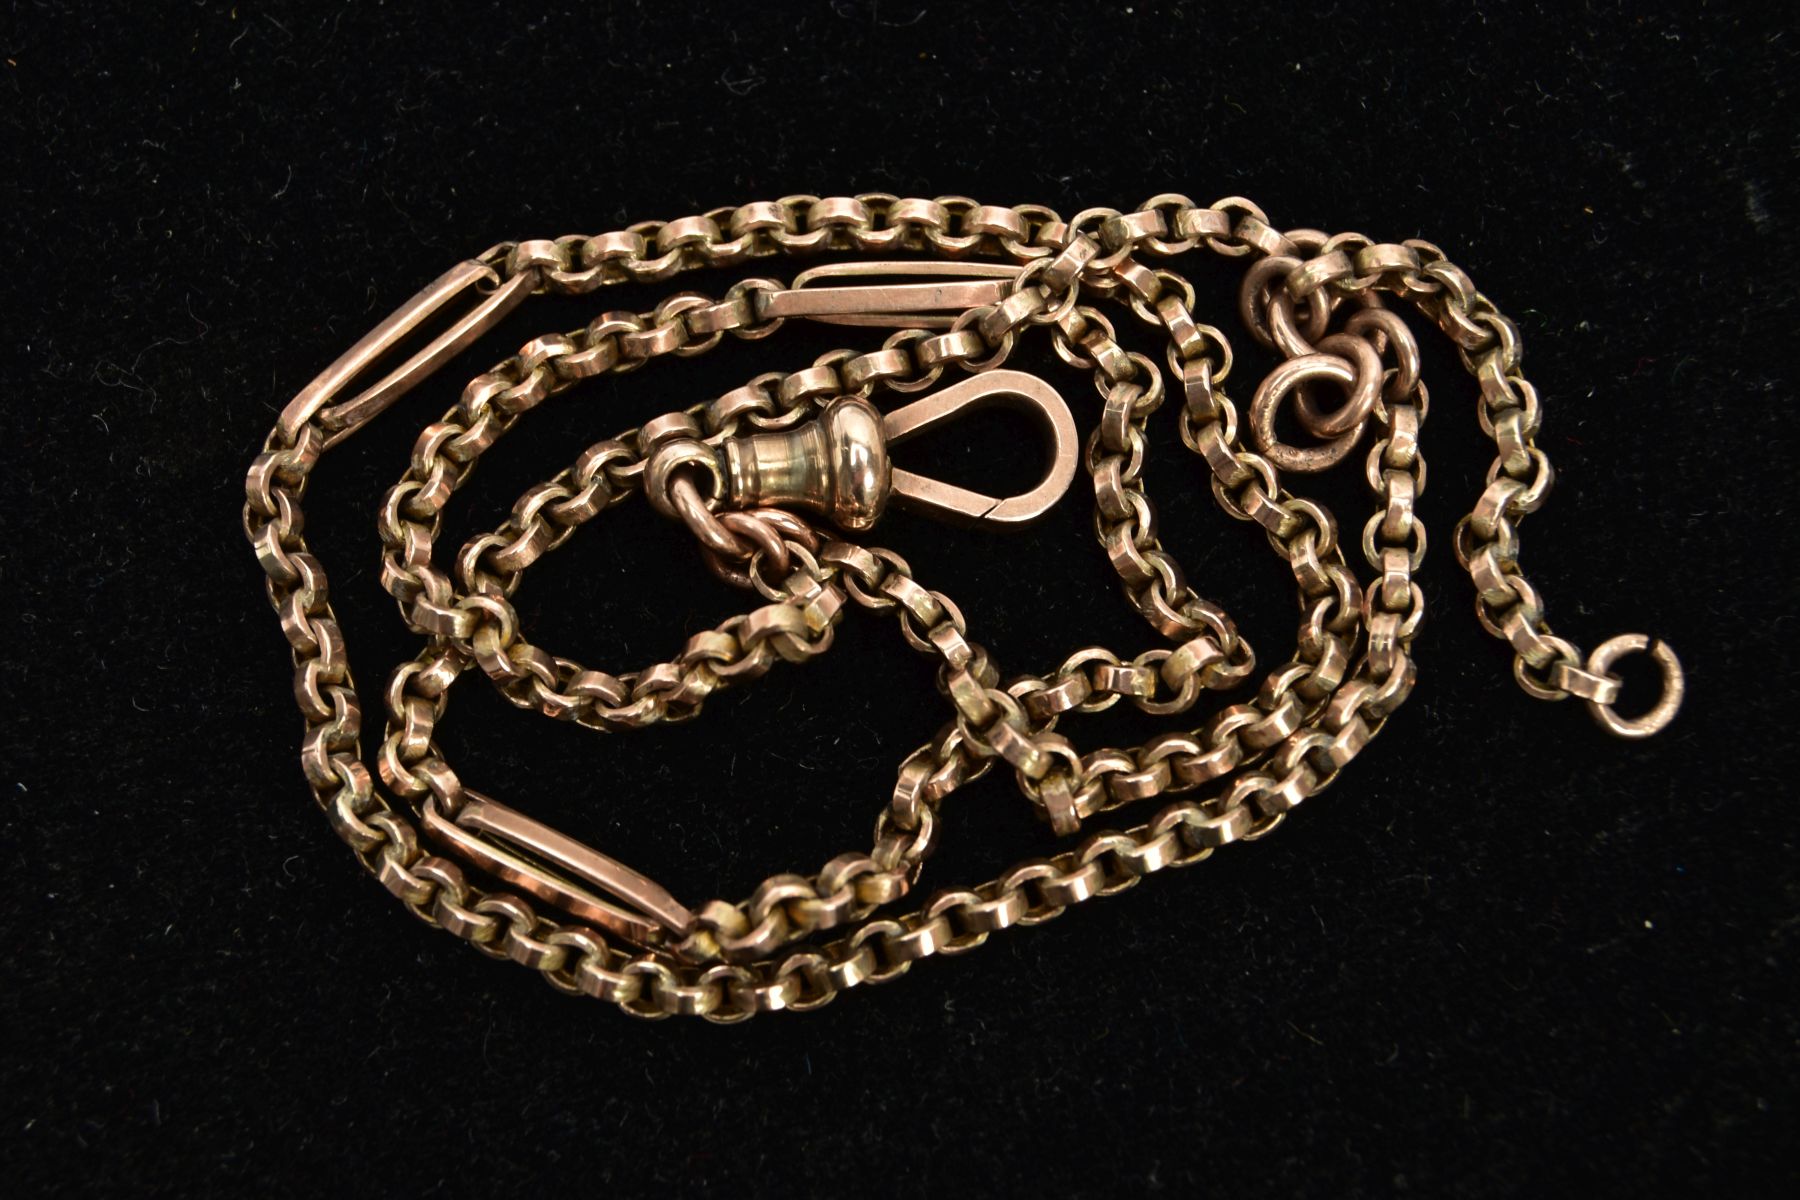 A LATE 19TH CENTURY 9CT GOLD DOUBLE ALBERT CHAIN, a rose gold belcher chain, interspaced with - Image 2 of 2